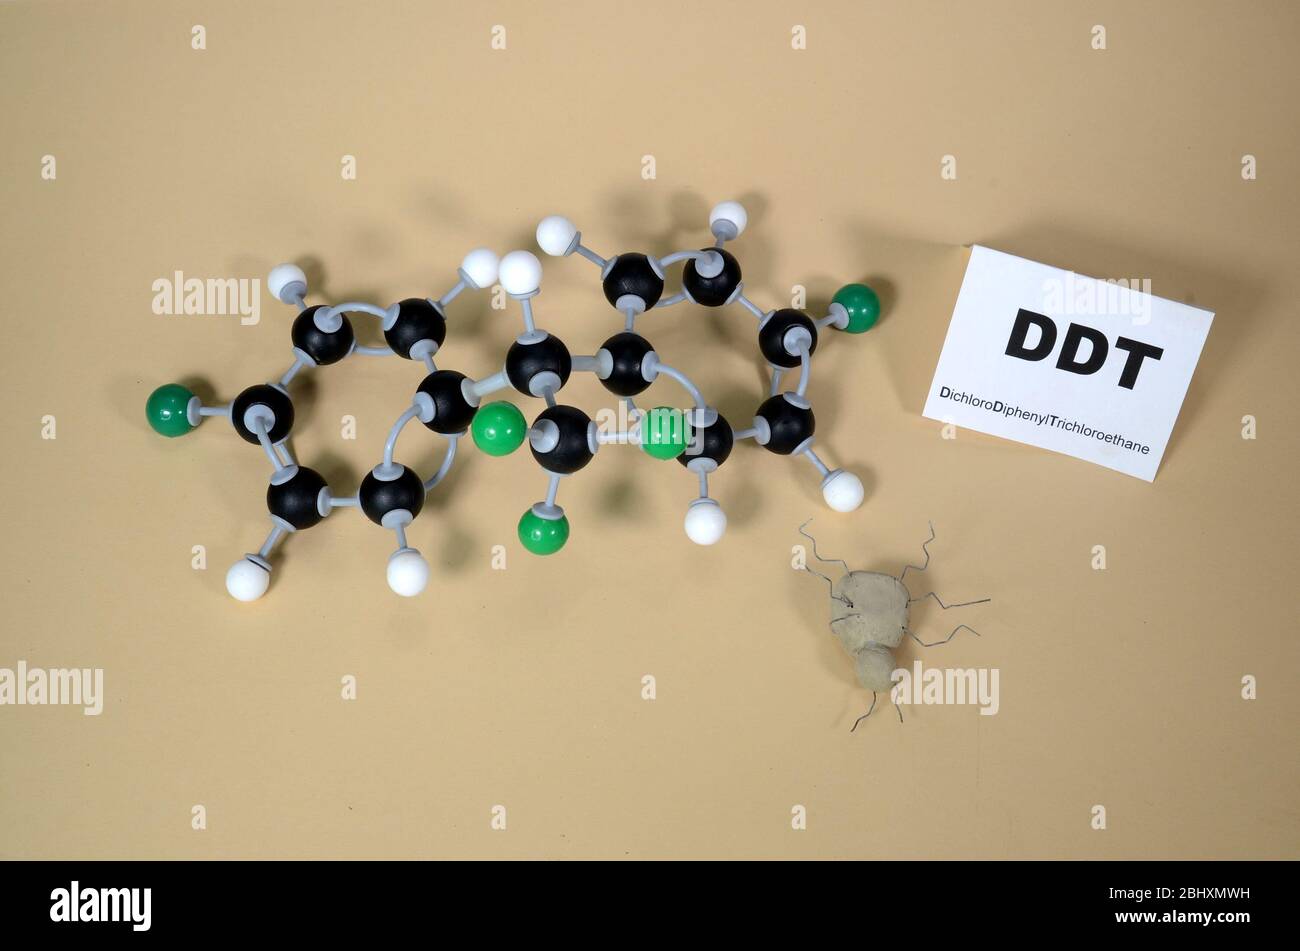 Molecule model of DDT - Dichlorodiphenyltrichloroethan with illustrative dead bug. White is Hydrogen, black is Carbon, and Green is Chlorine. Stock Photo